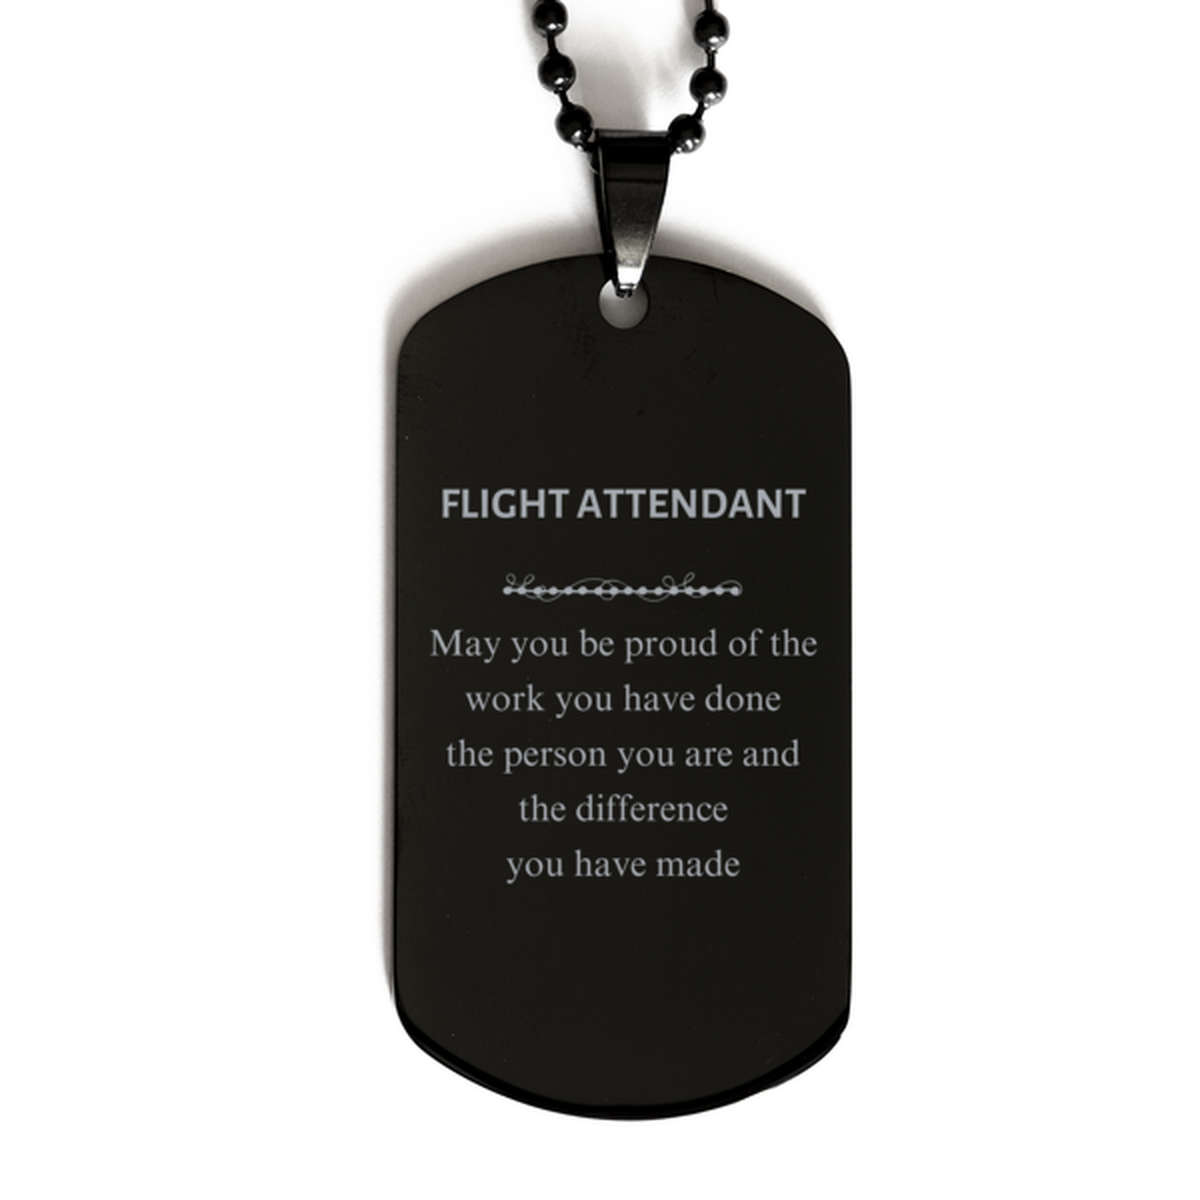 Flight Attendant May you be proud of the work you have done, Retirement Flight Attendant Black Dog Tag for Colleague Appreciation Gifts Amazing for Flight Attendant